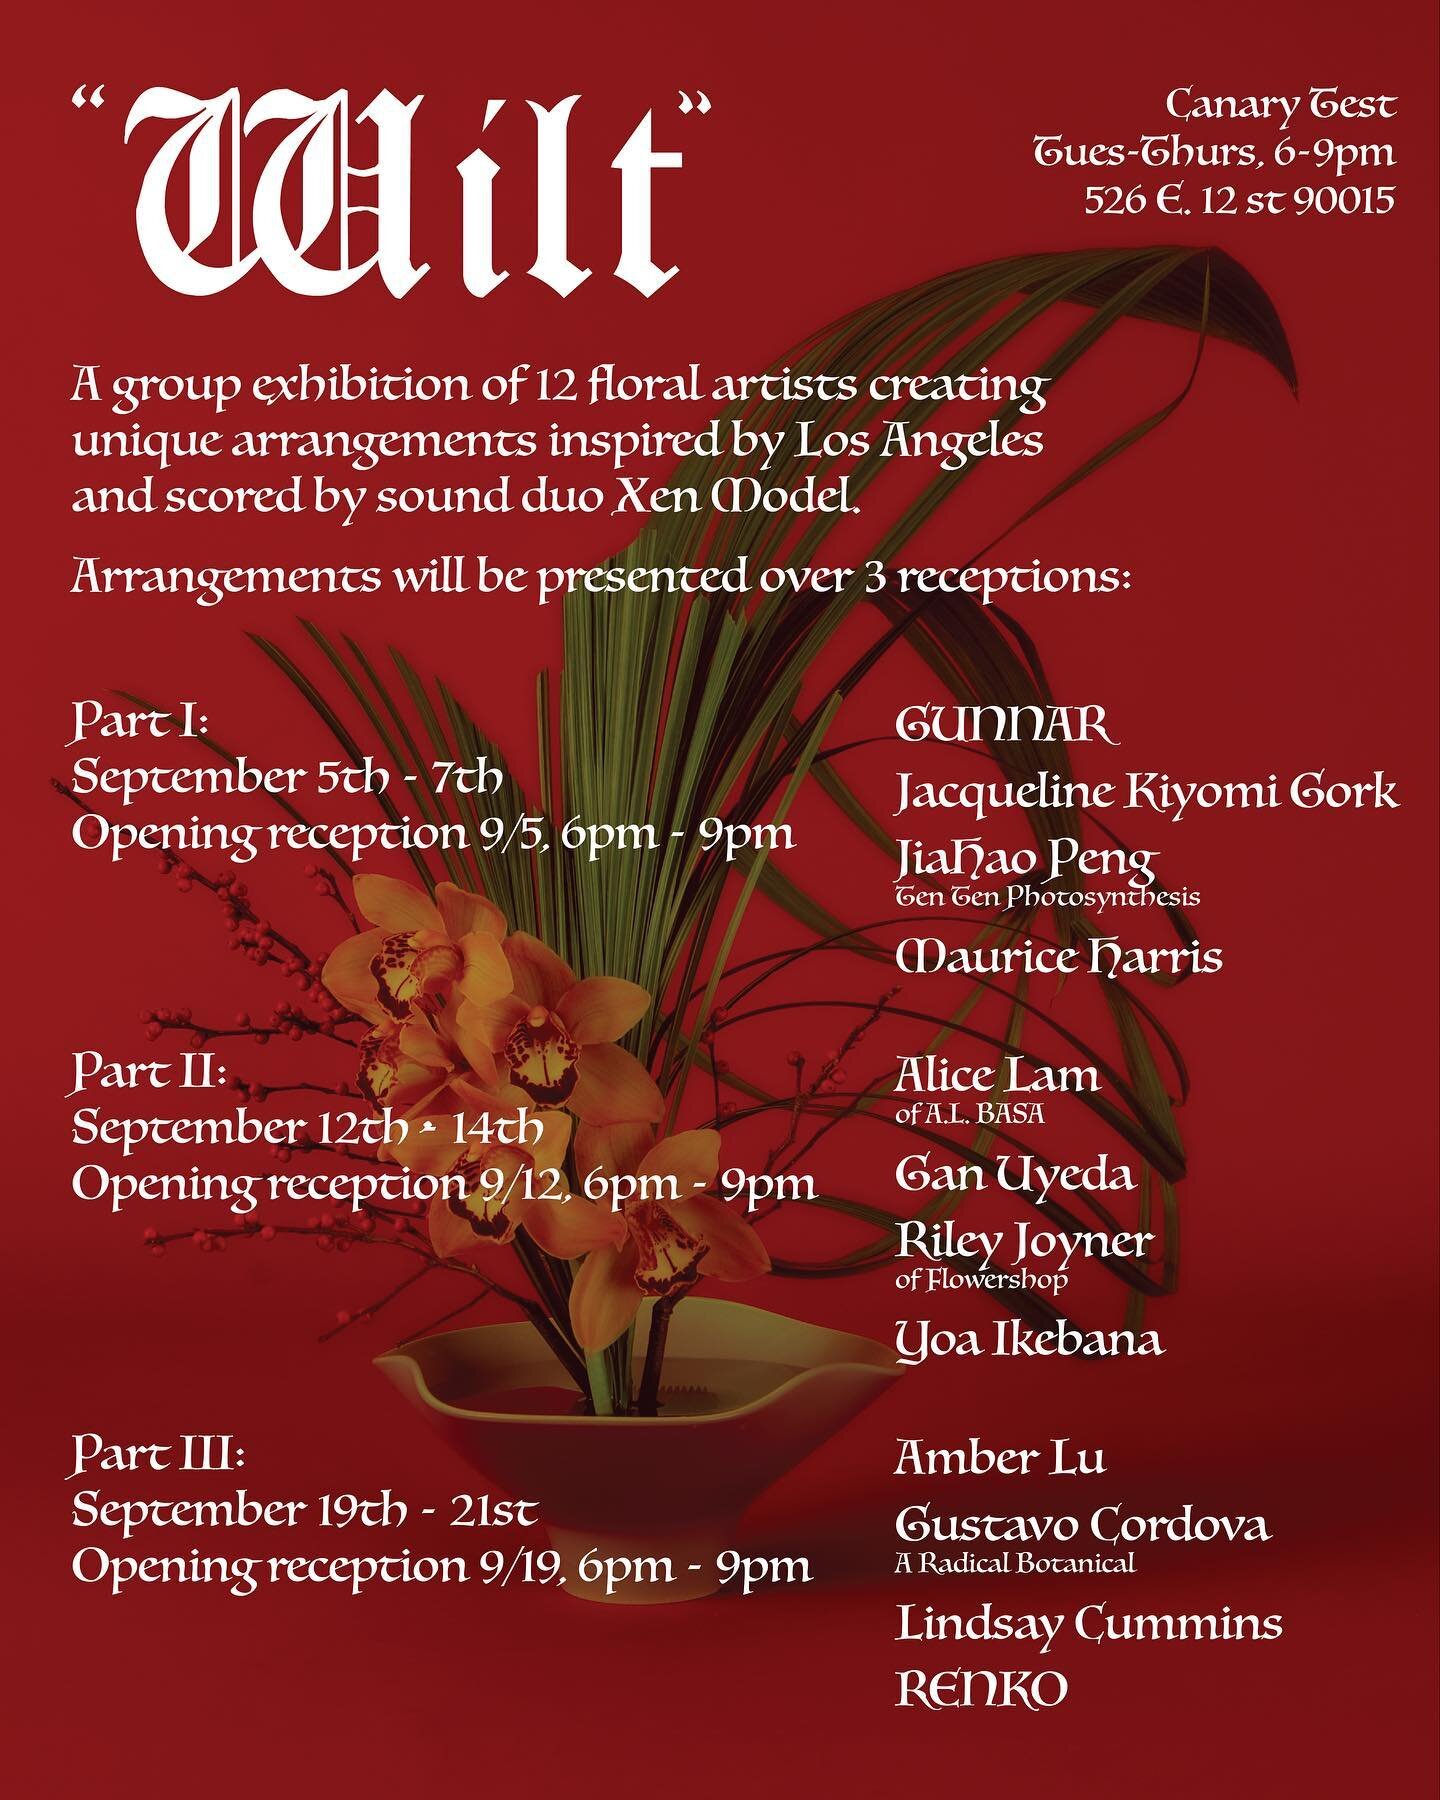 Please come visit tomorrow for the opening reception at @canarytest 🤍 

&quot;Wilt&quot; Part Il featuring arrangements by @a..basa @gankanji
@flowershop.studio @yoamizuno with a live performance b @xen.model

Opening Reception:
September 12th, 6pm 